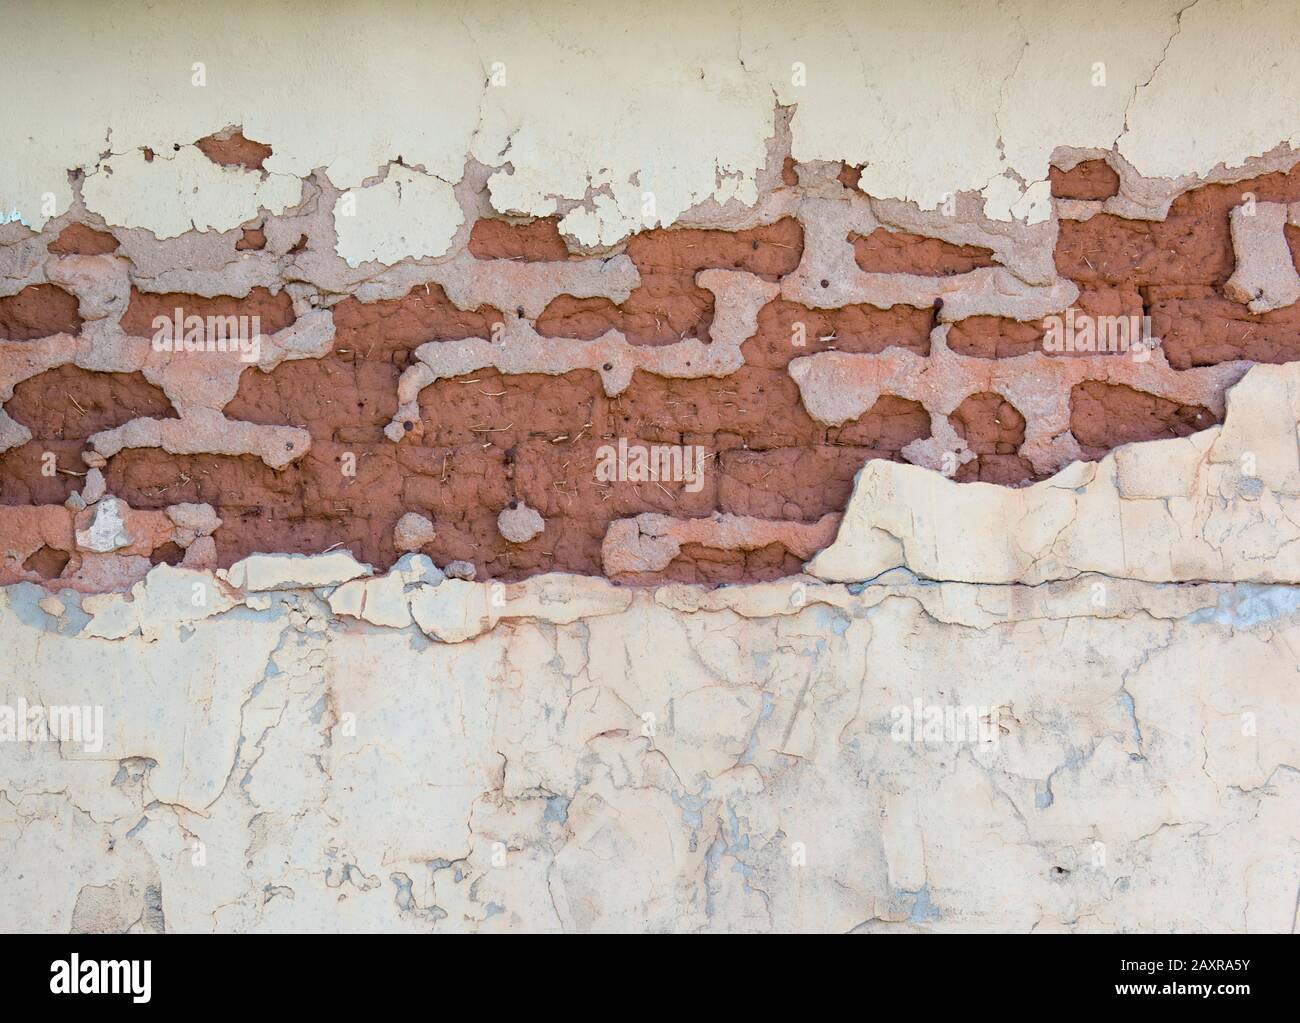 Peeling, chipped paint on an adobe building Stock Photo